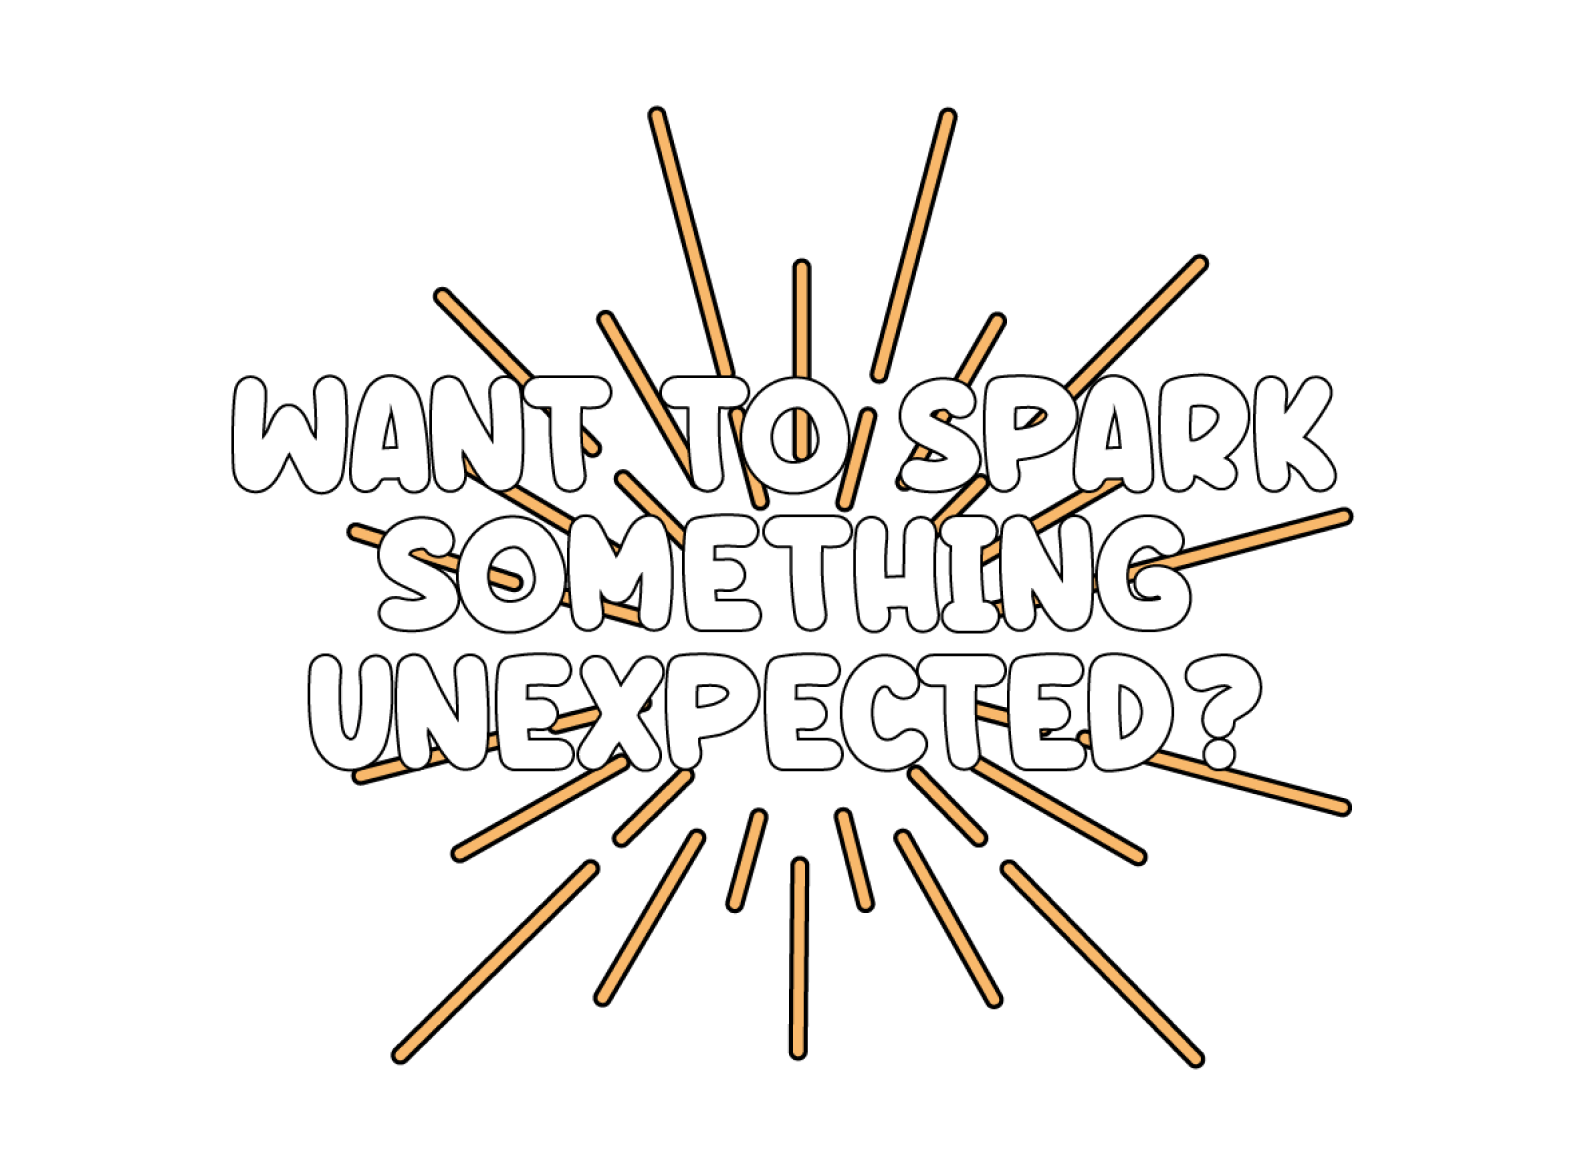 Want to spark something unexpected?